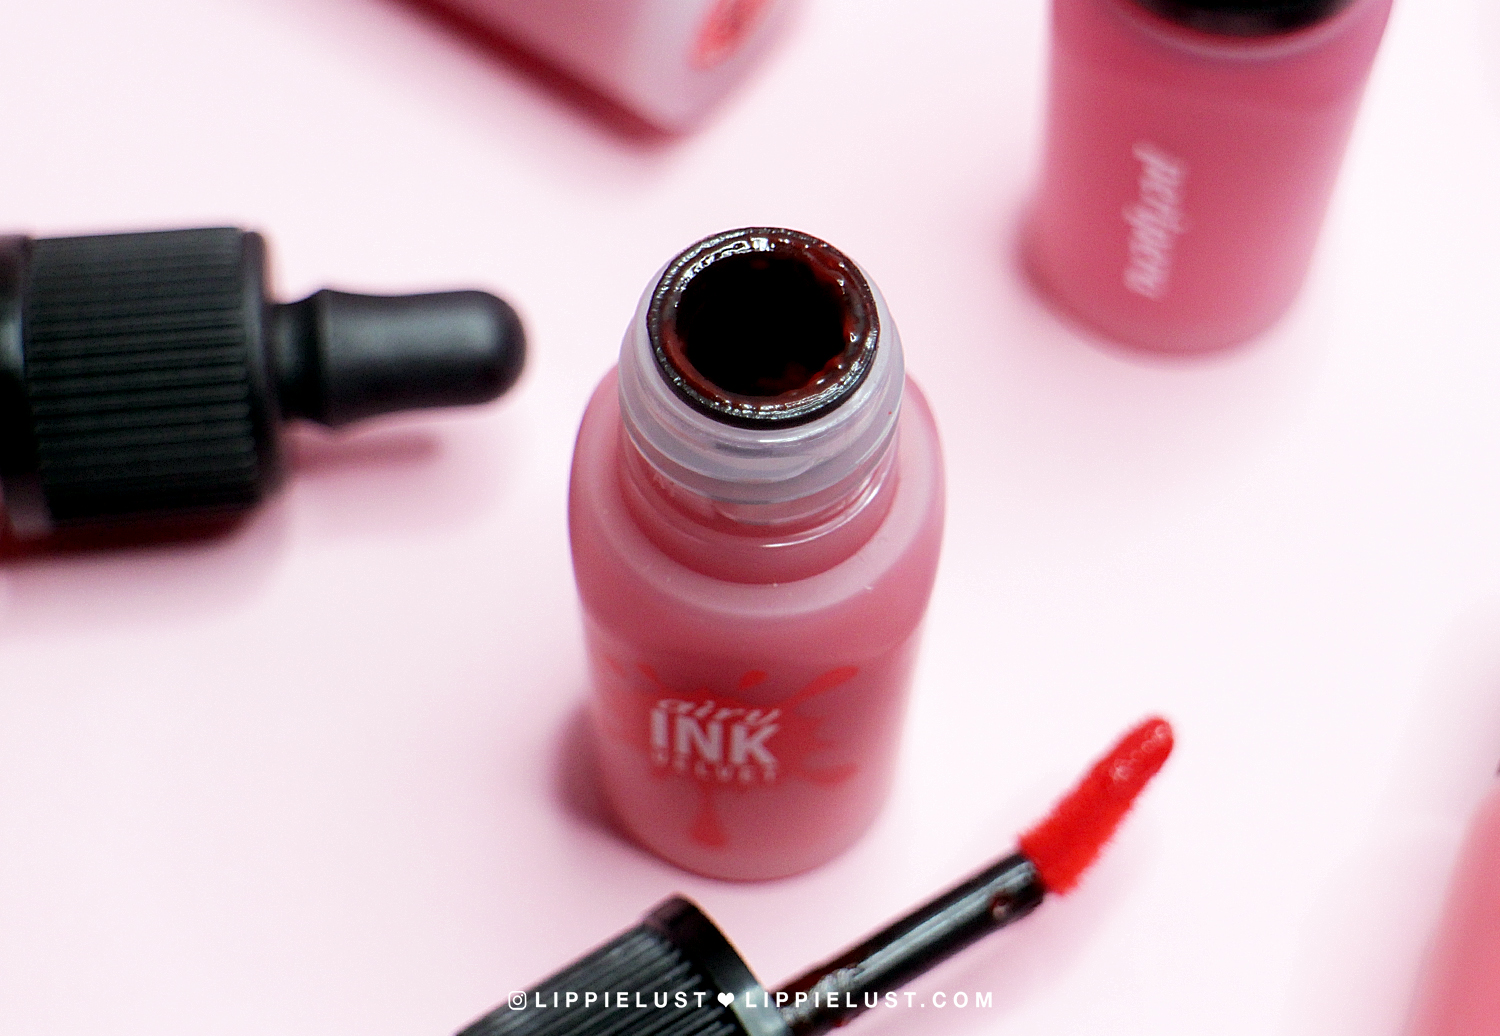 SWATCH & REVIEW] Peripera Ink The Airy Velvet Lip Tint